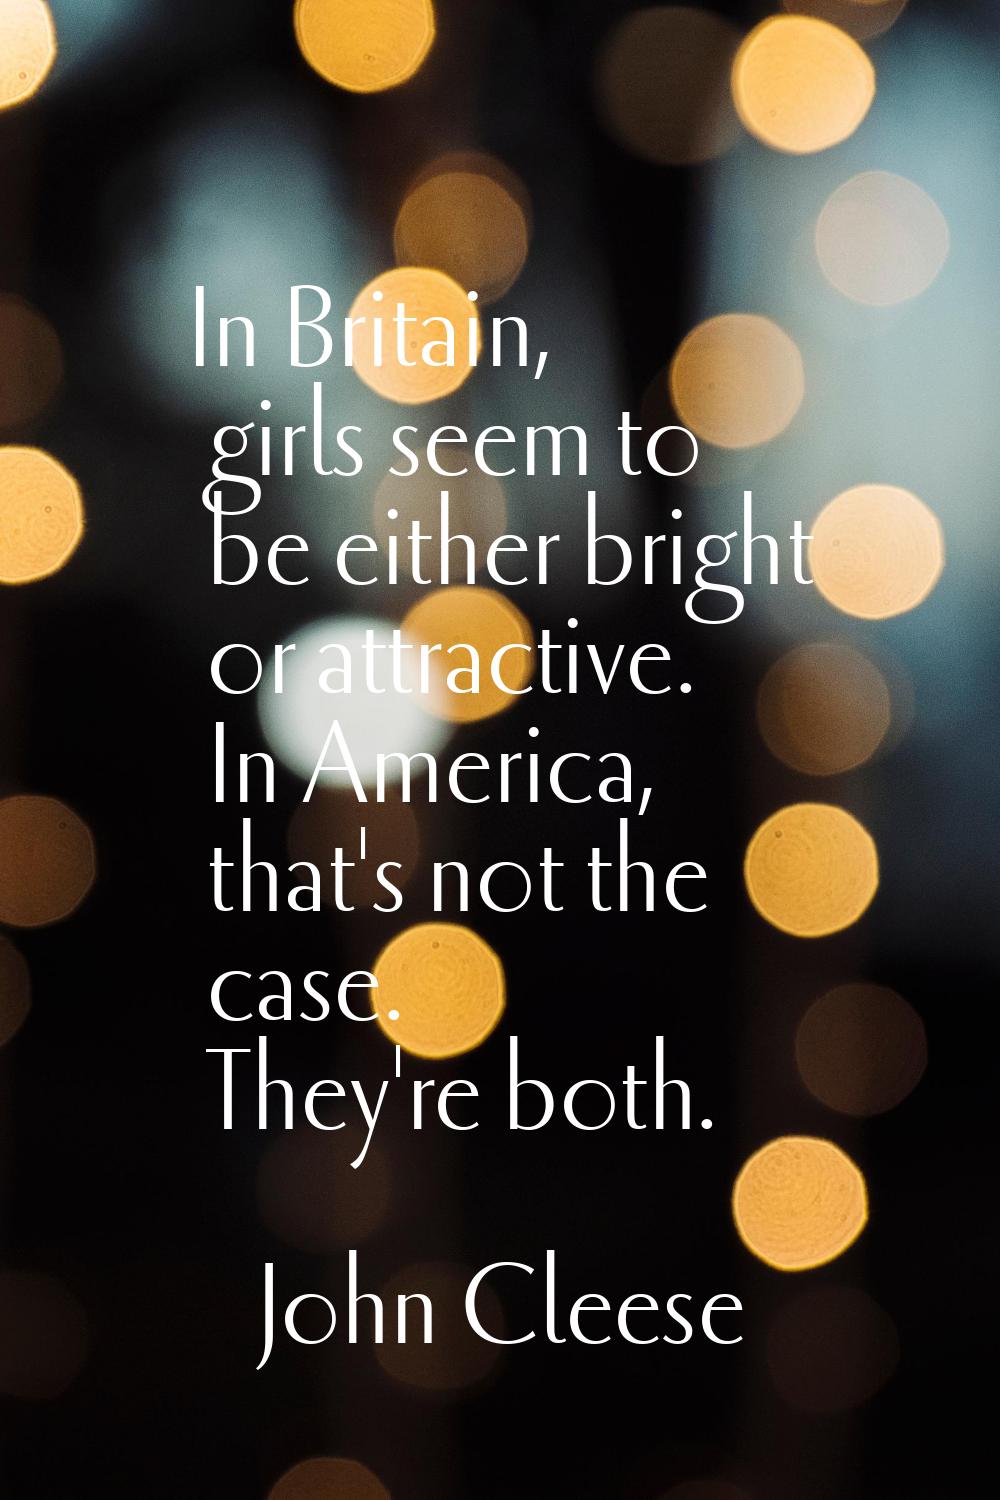 In Britain, girls seem to be either bright or attractive. In America, that's not the case. They're 